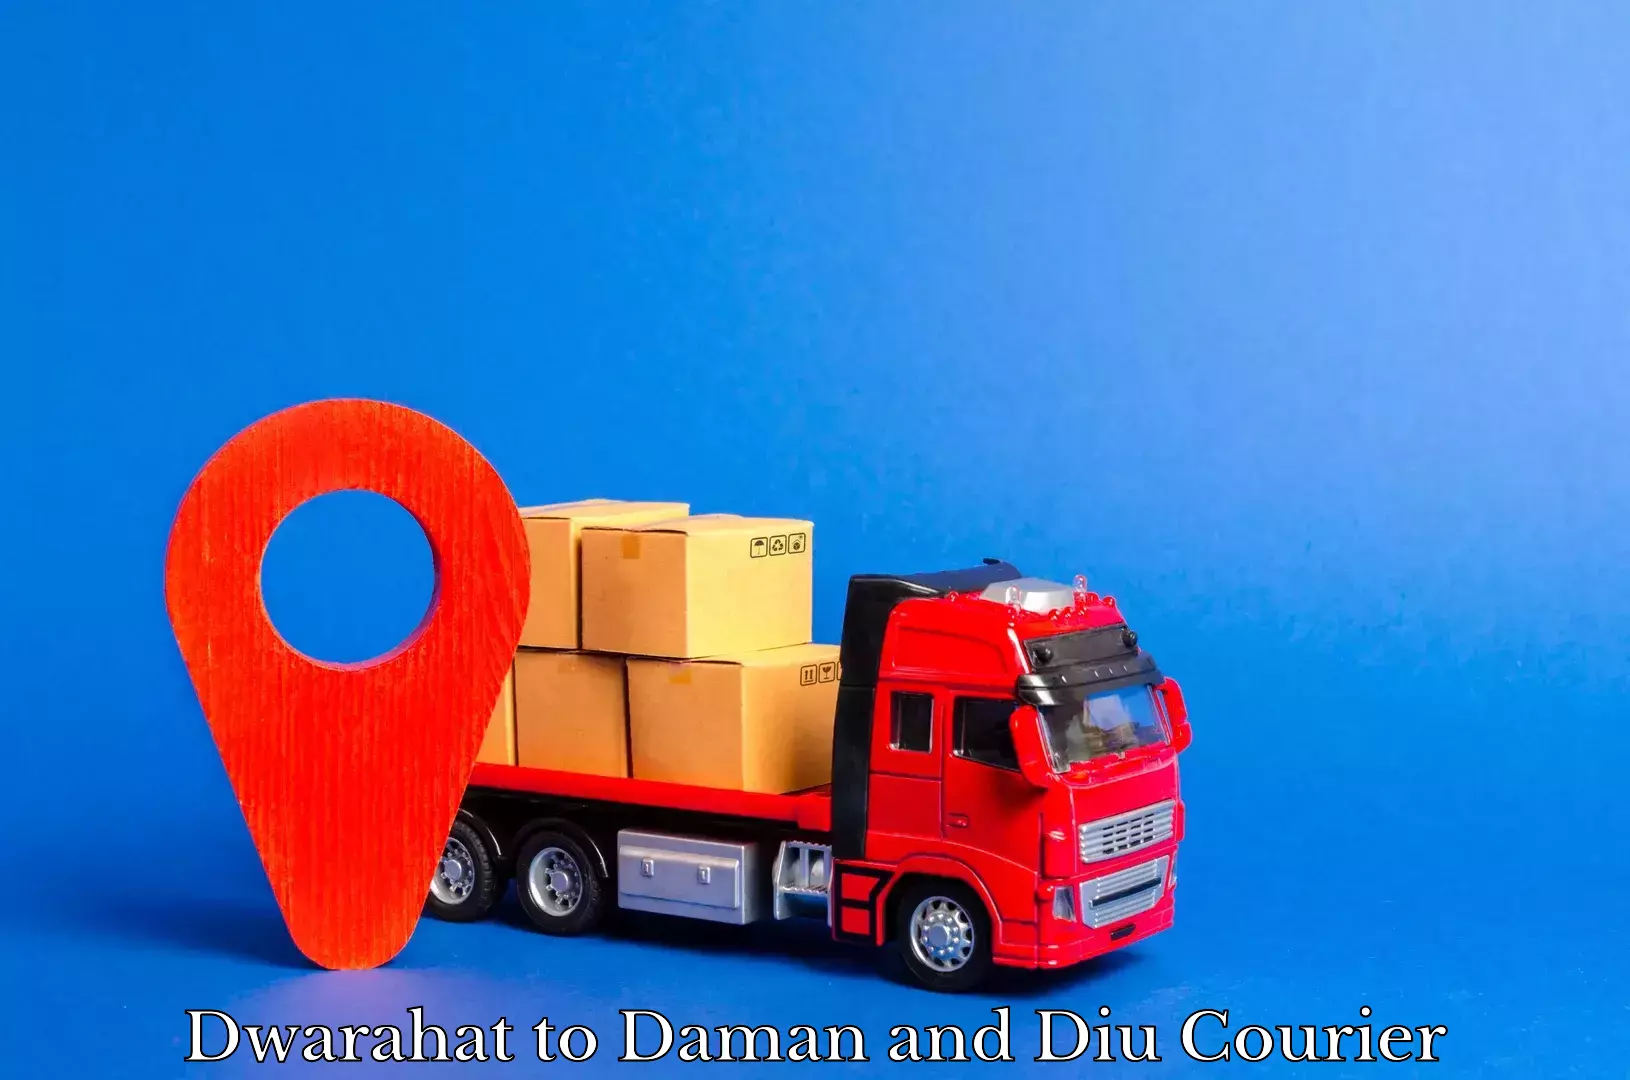 Affordable parcel service Dwarahat to Daman and Diu